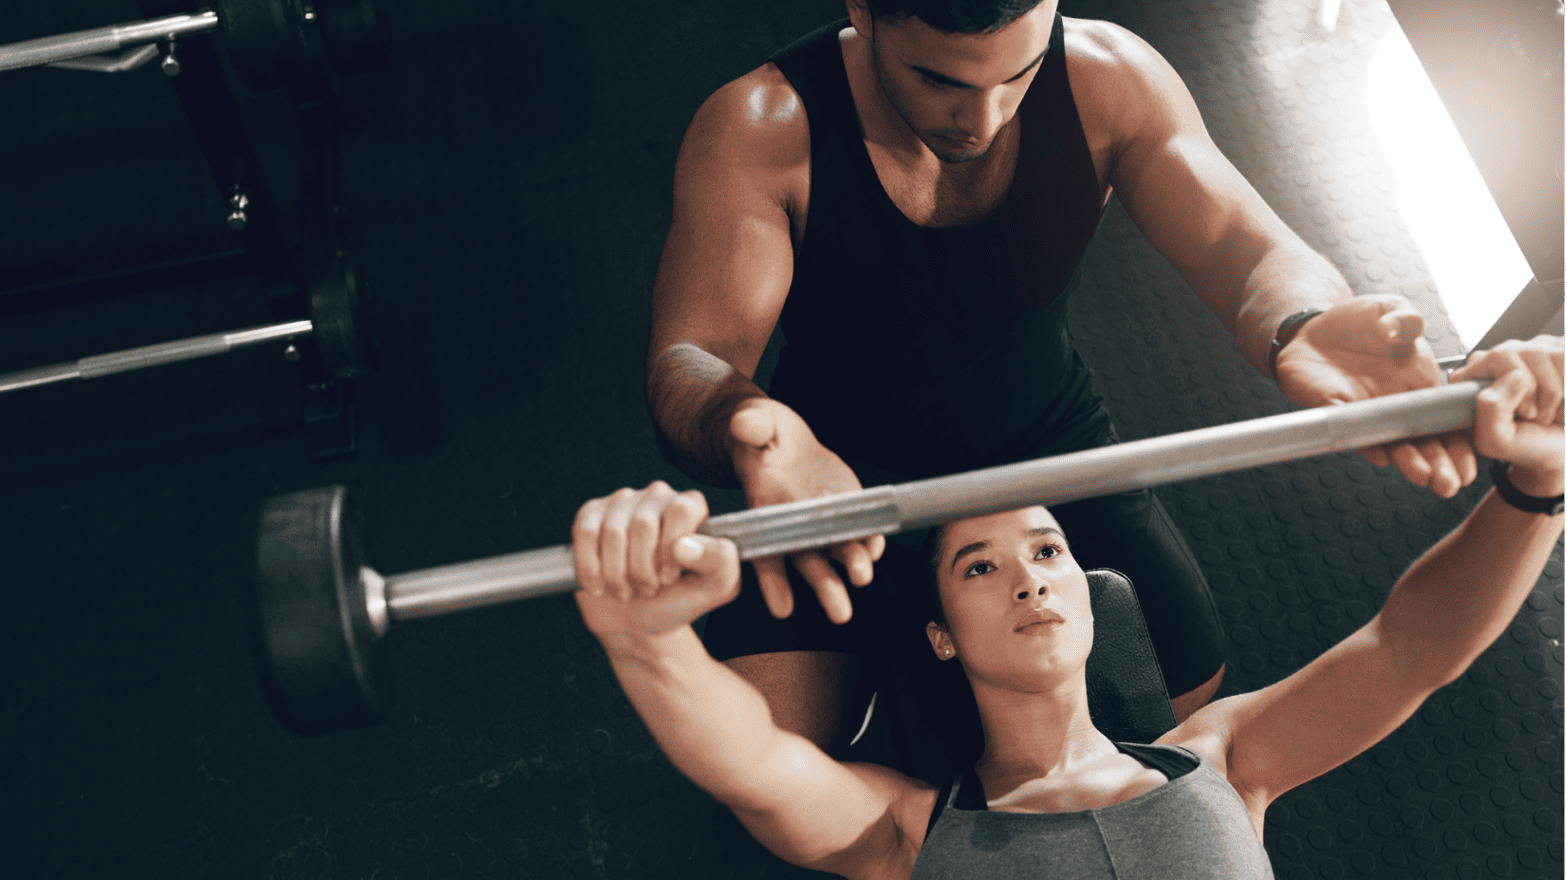 personal training services in Olathe